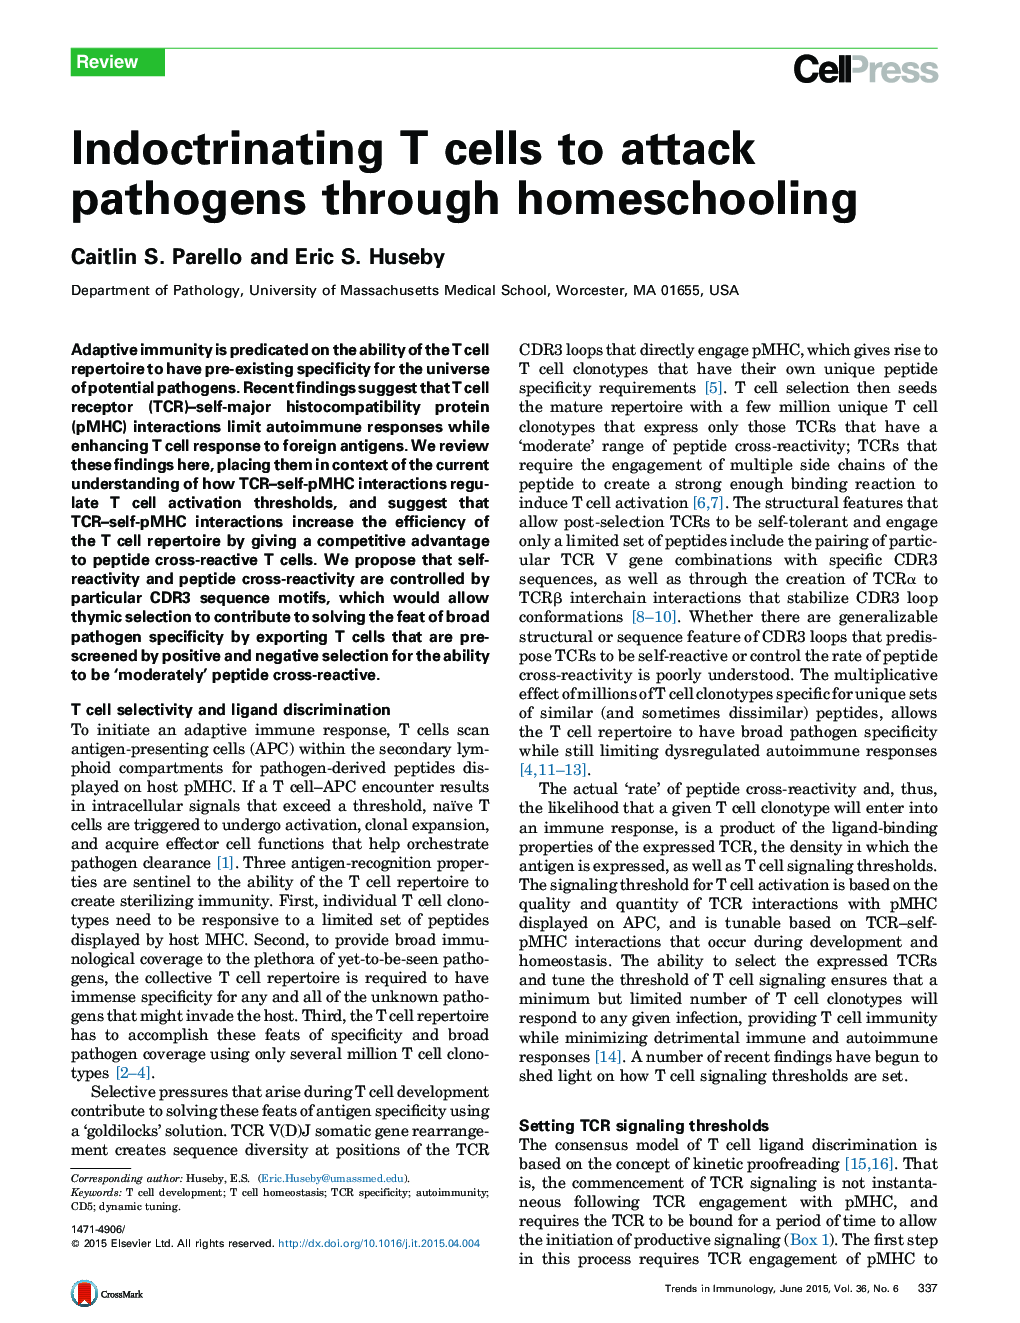 Indoctrinating T cells to attack pathogens through homeschooling